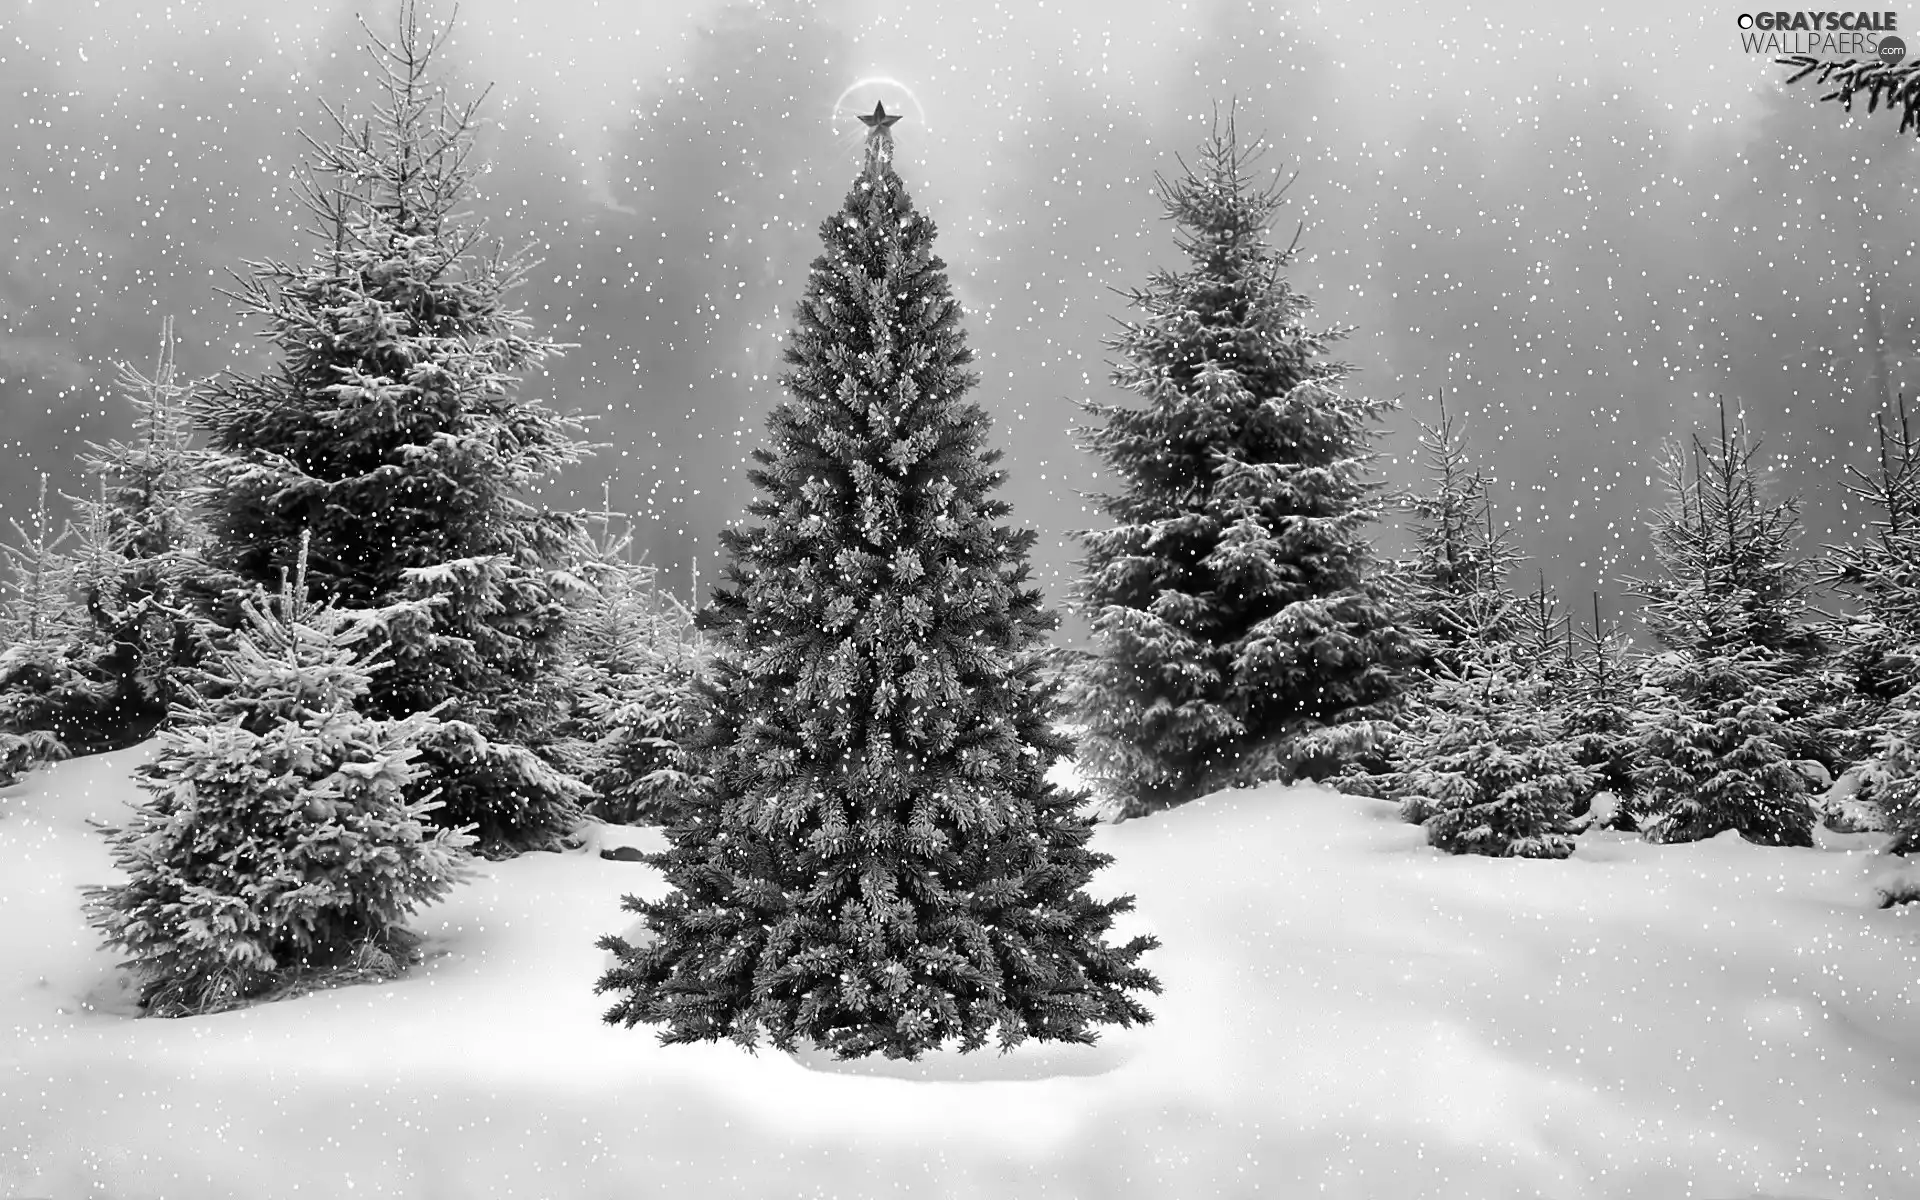 Grayscale Christmas, winter, incident, snow, christmas tree, forest ...